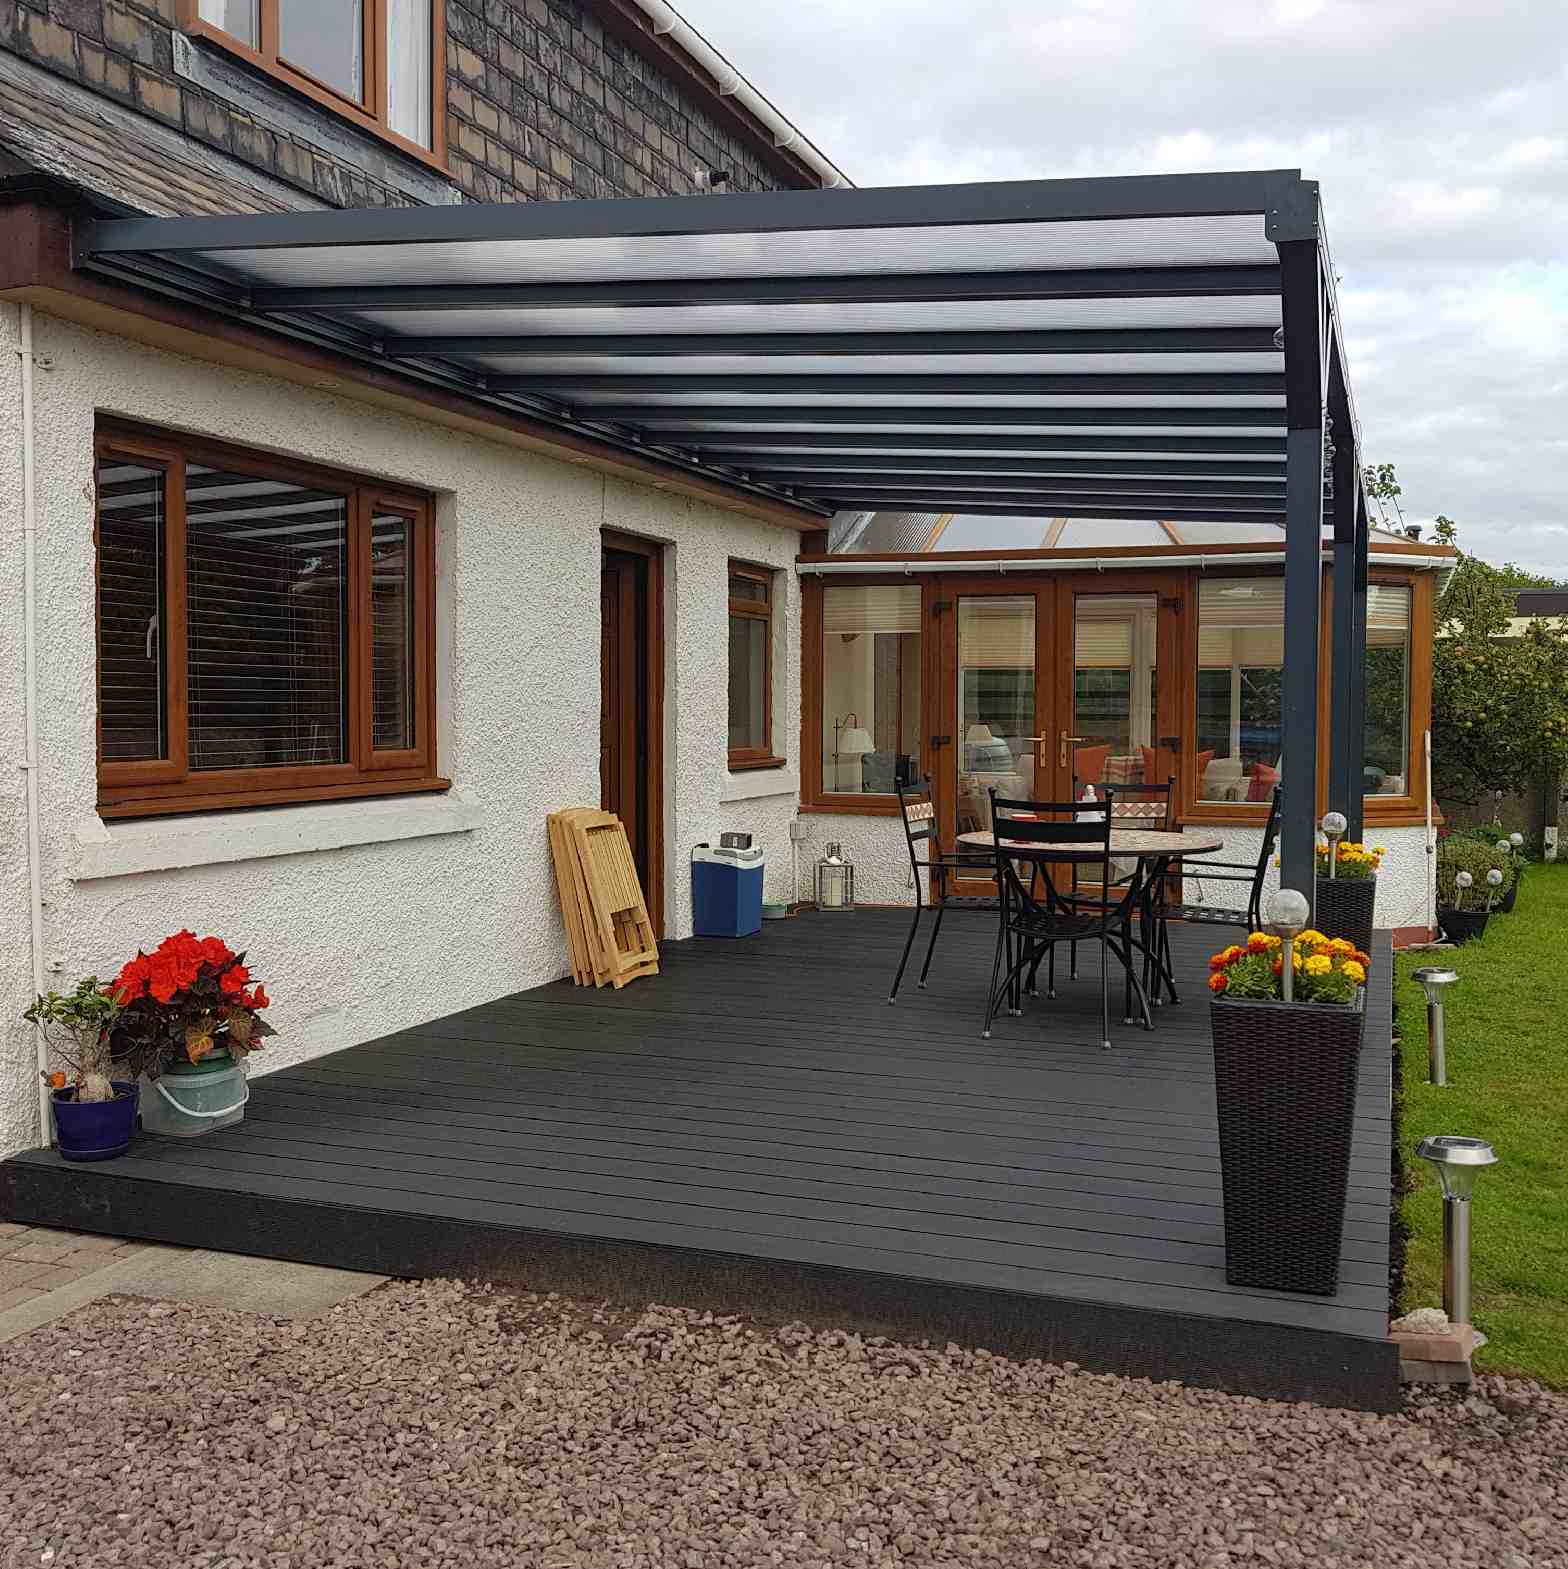 Buy Omega Verandah, Anthracite Grey, 16mm Polycarbonate Glazing - 5.2m (W) x 1.5m (P), (3) Supporting Posts online today